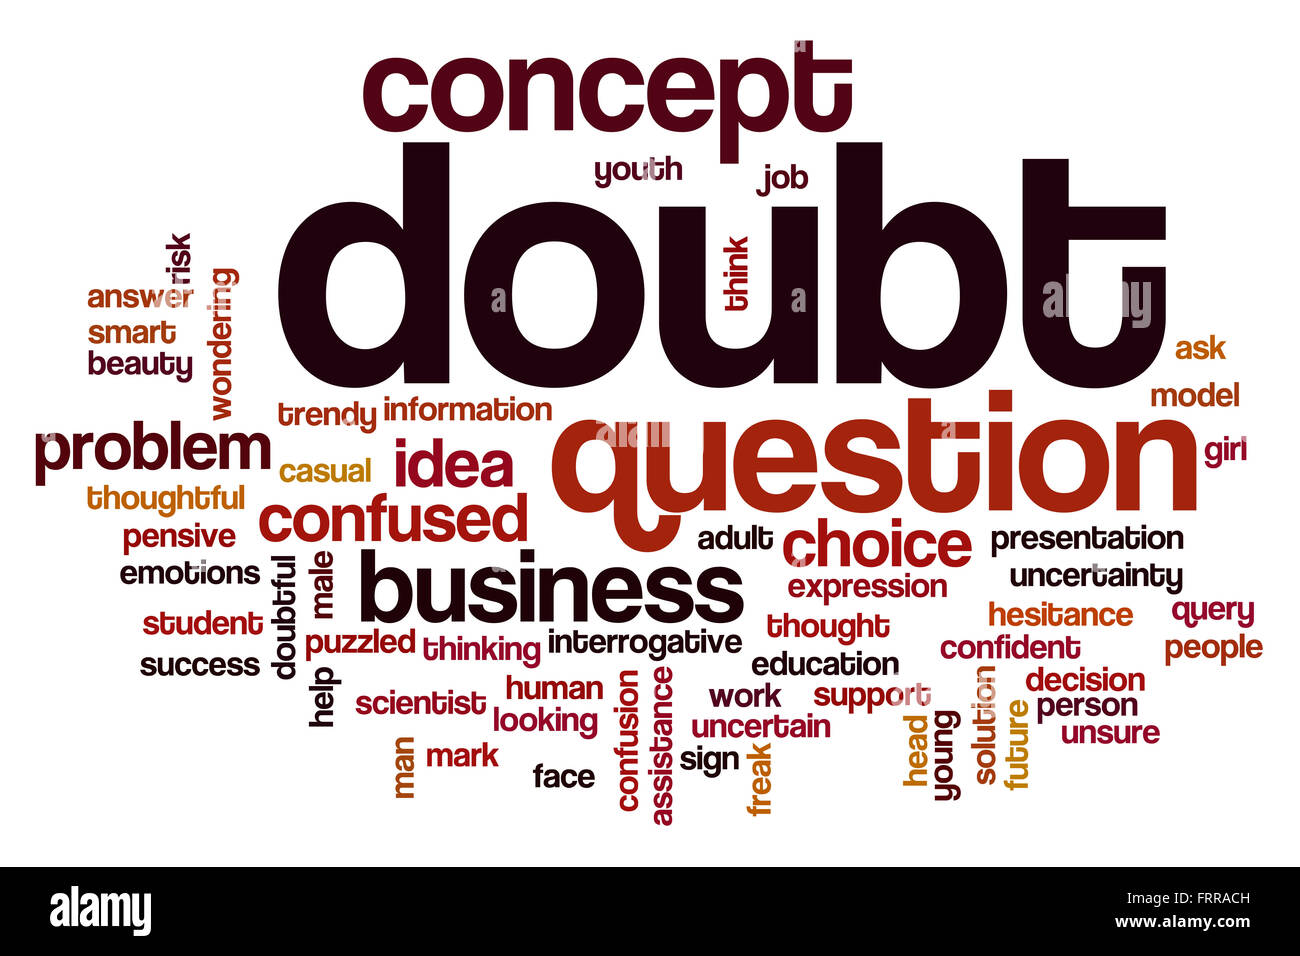 Doubt word cloud concept with question problem related tags Stock Photo